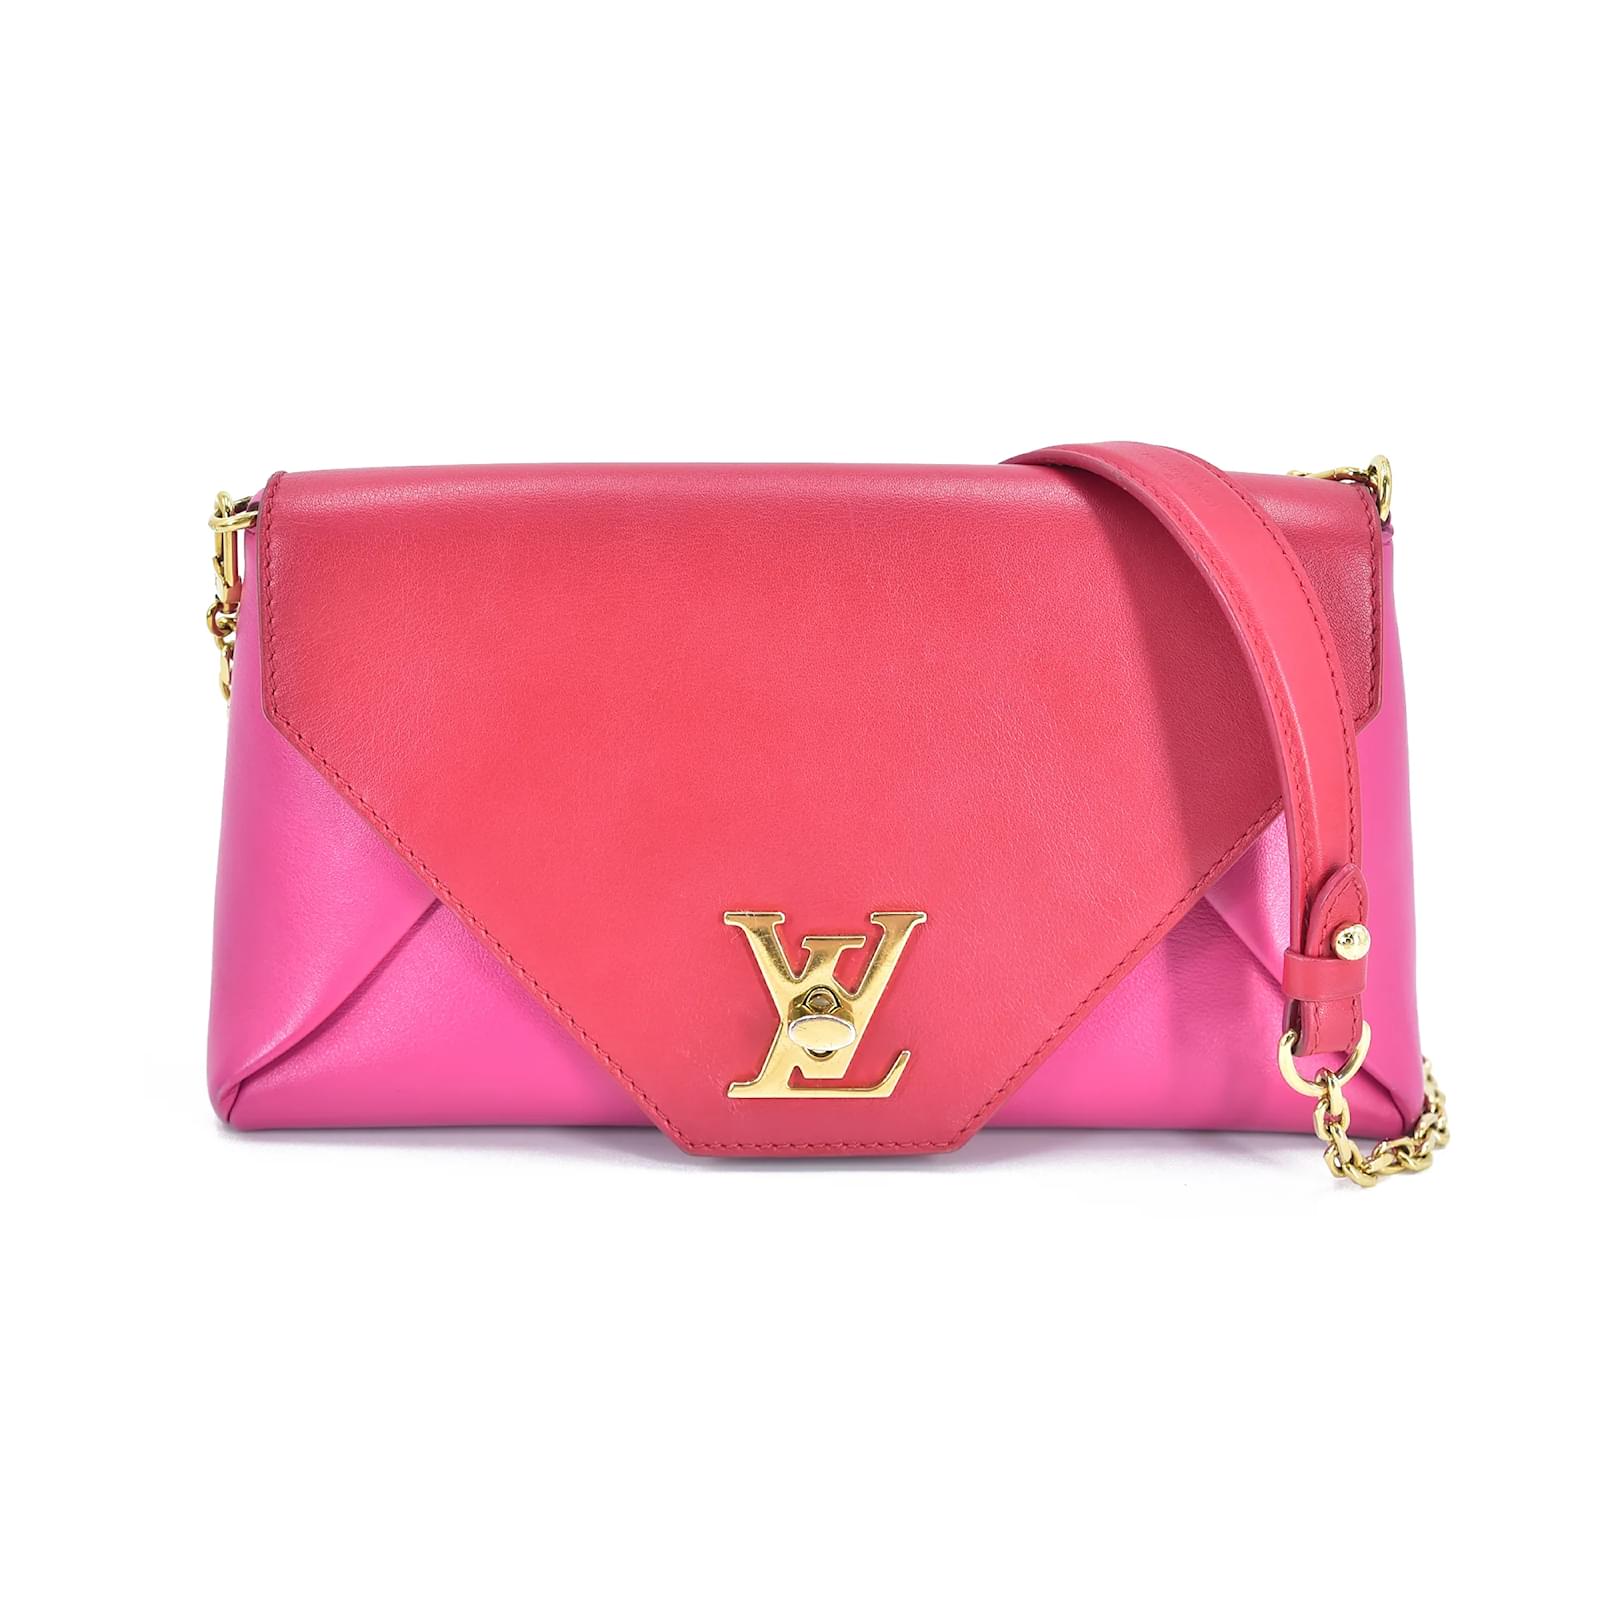 Louis Vuitton Love Note Shoulder Bag Pink Leather Pony-style